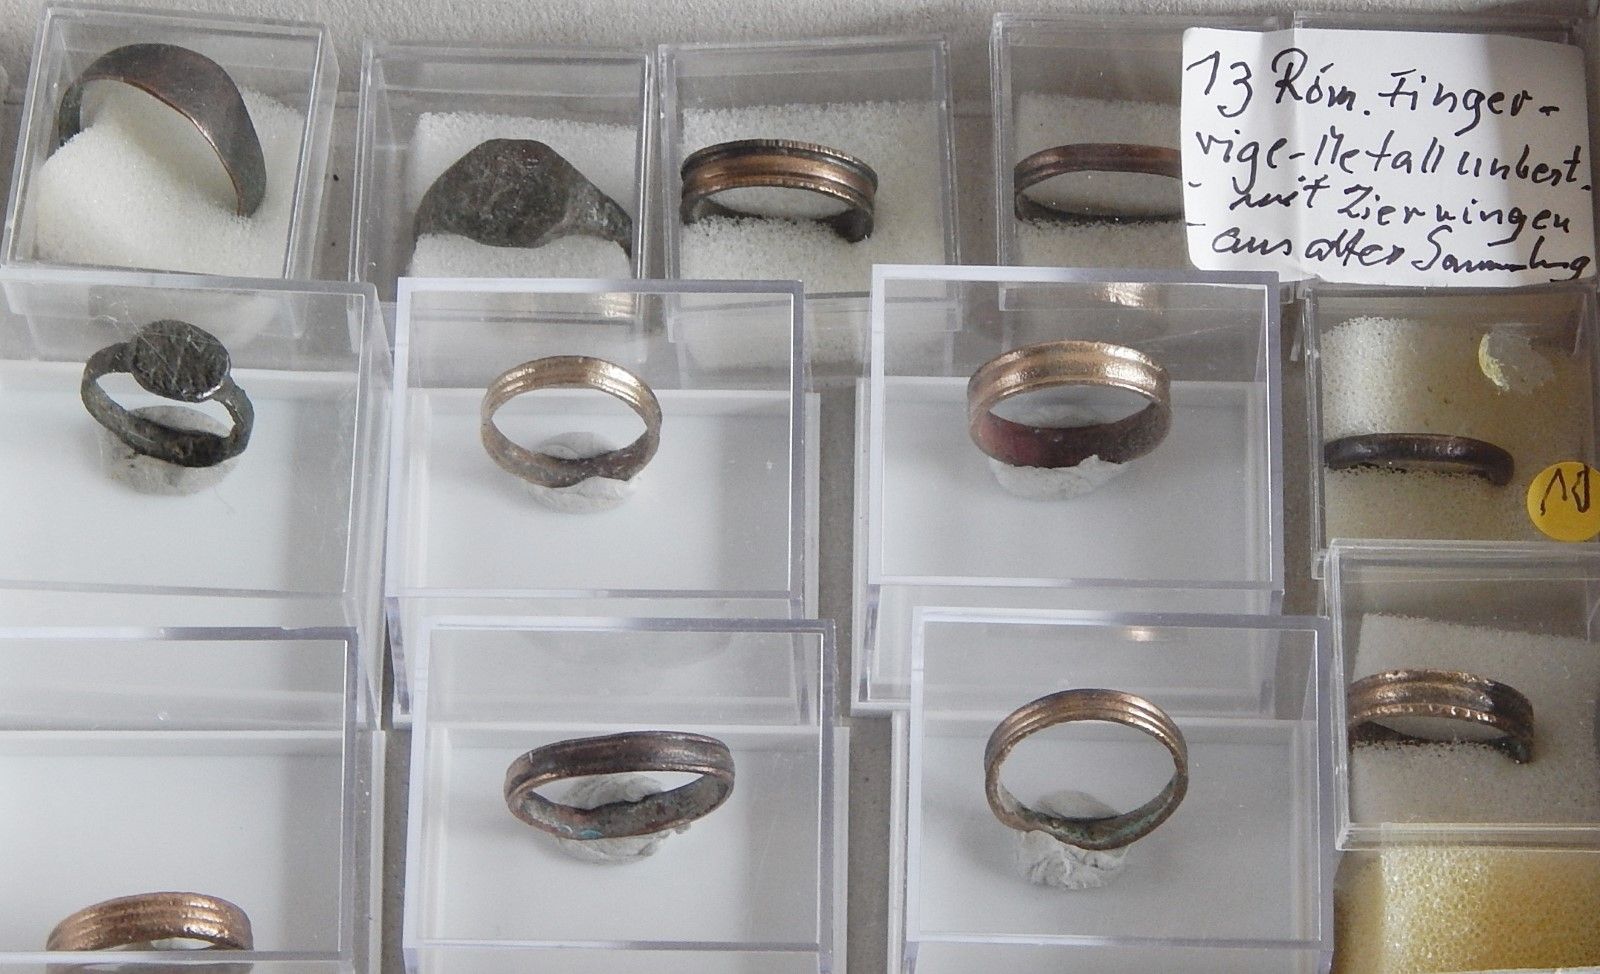 Null Mixed lot of 13 Roman rings from an old collection, together